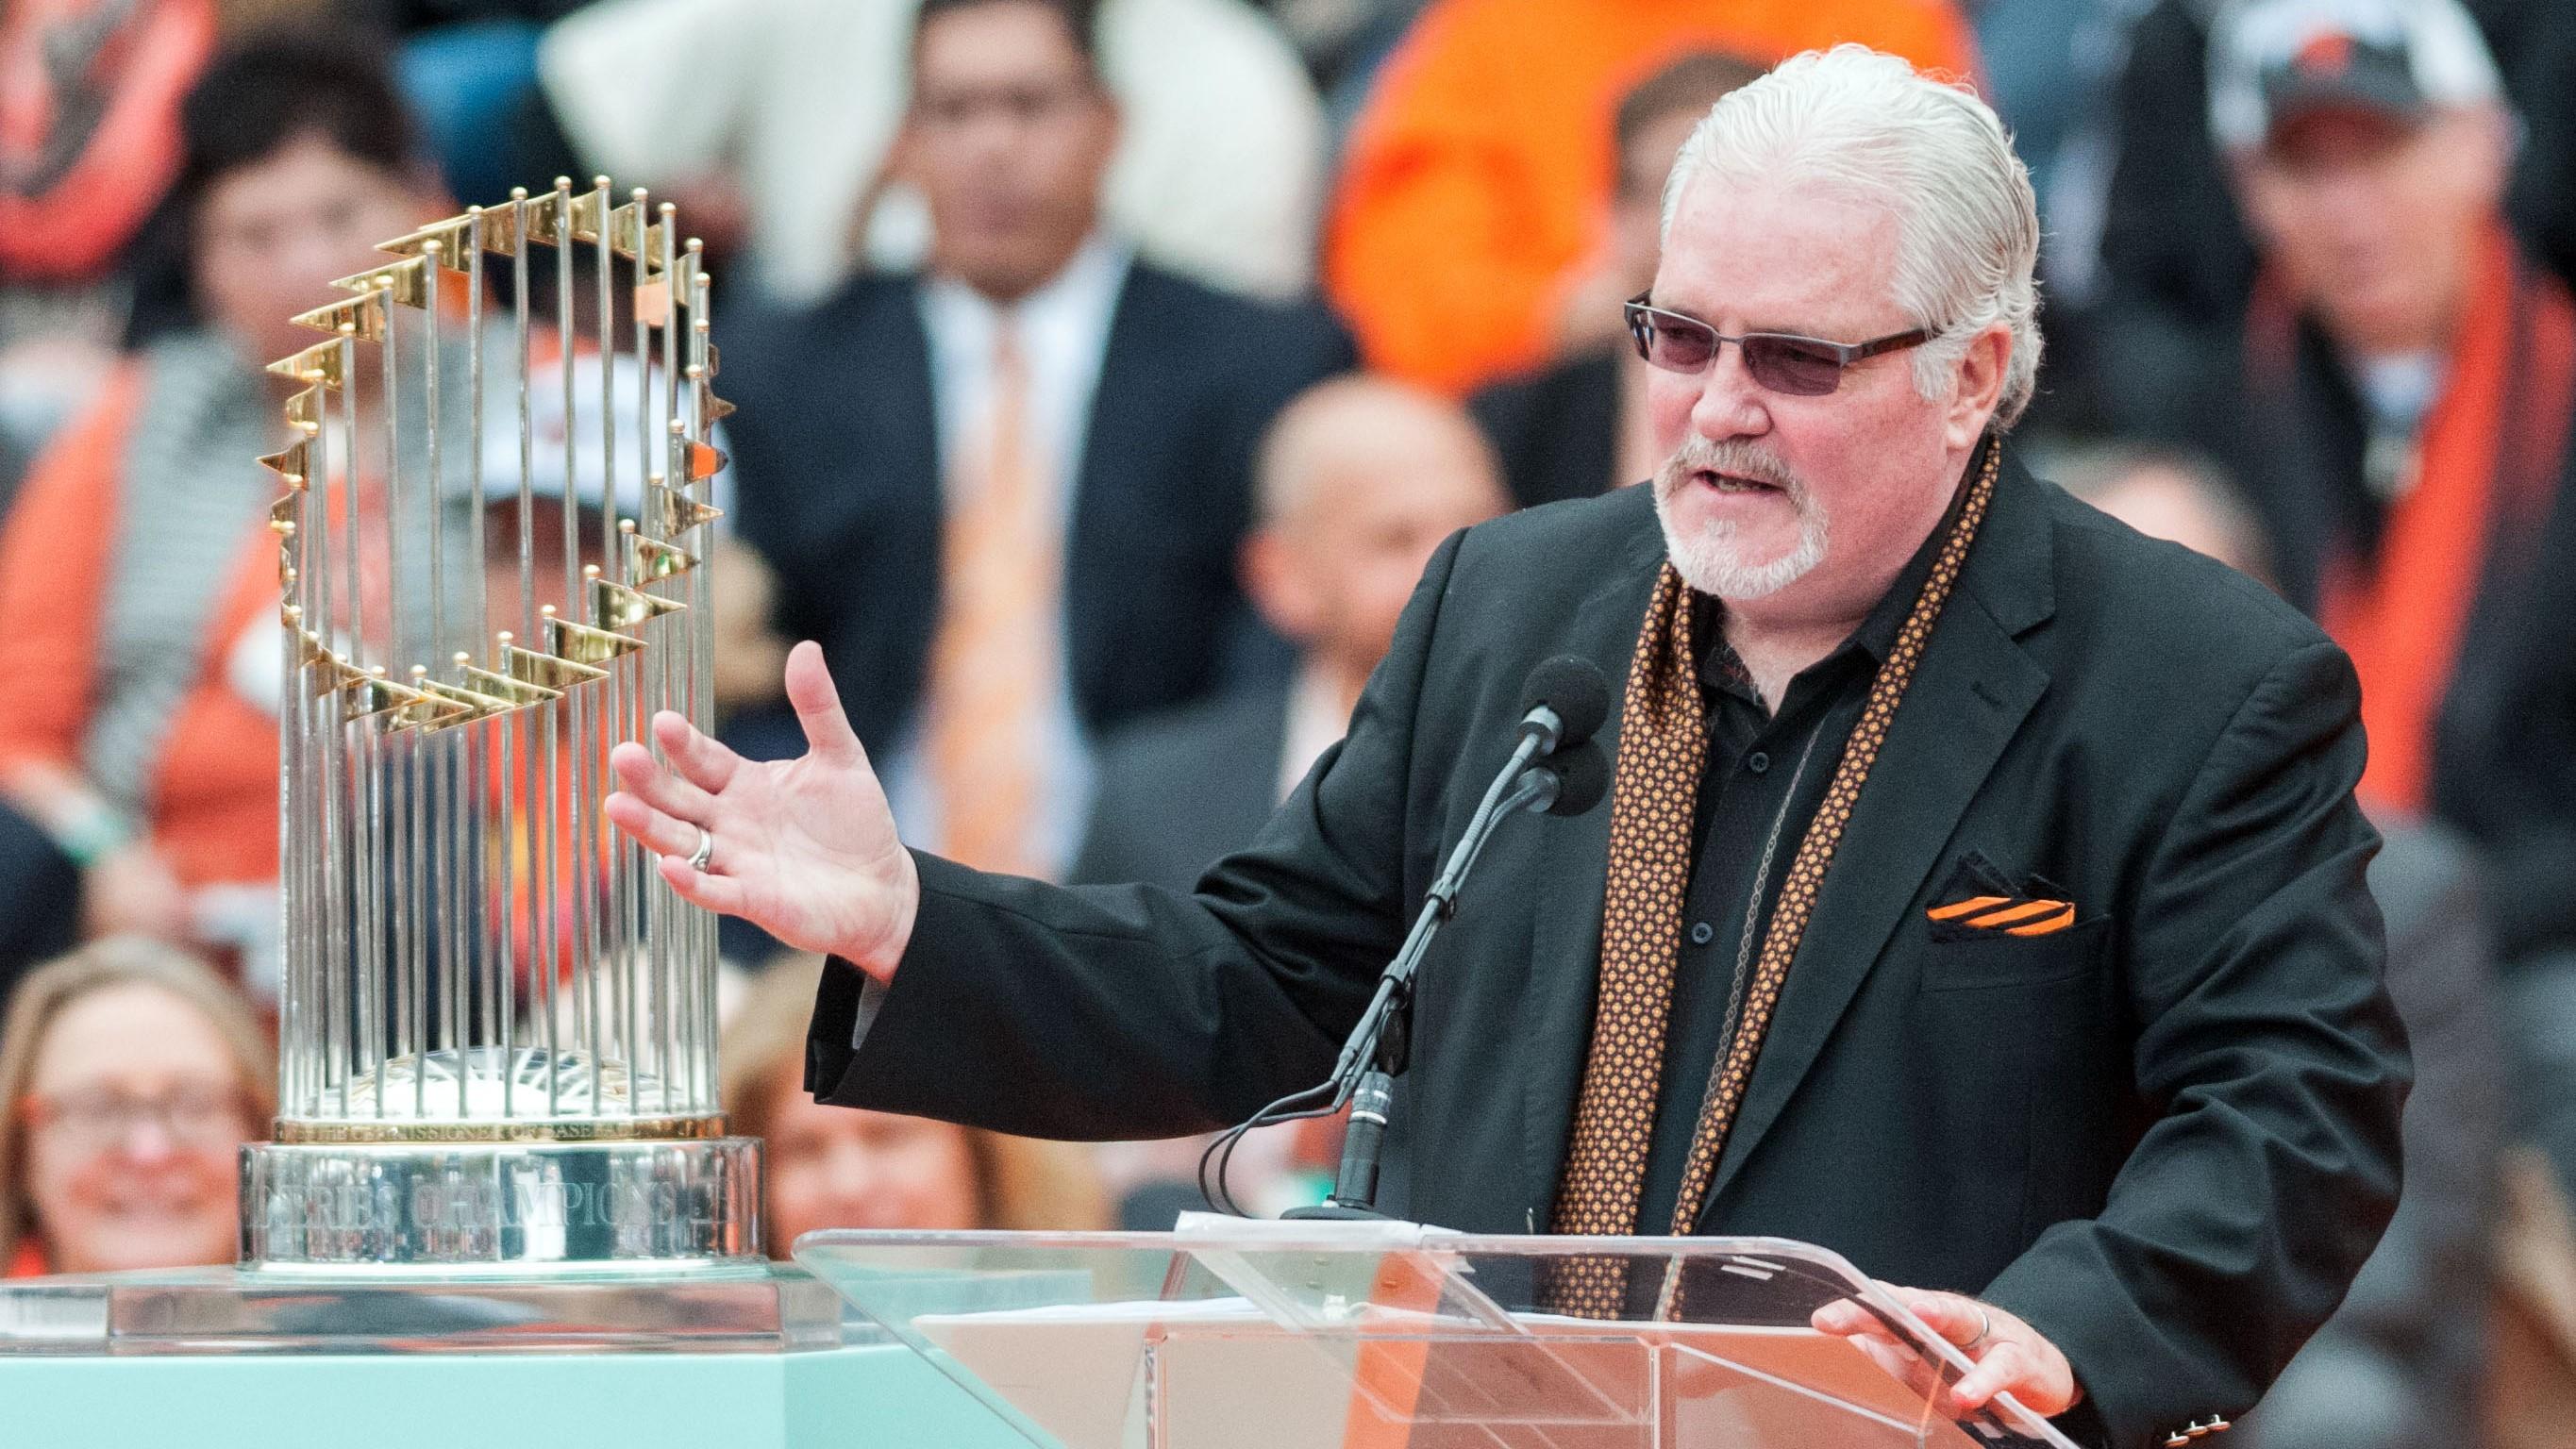 Oct 31, 2014; San Francisco, CA, USA; San Francisco Giants general manager Brian Sabean speaks to the crowd during the World Series celebration at City Hall. The San Francisco Giants defeated the Kansas City Royals in game seven of the World Series. Mandatory Credit: Ed Szczepanski-USA TODAY Sports / Ed Szczepanski-USA TODAY Sports